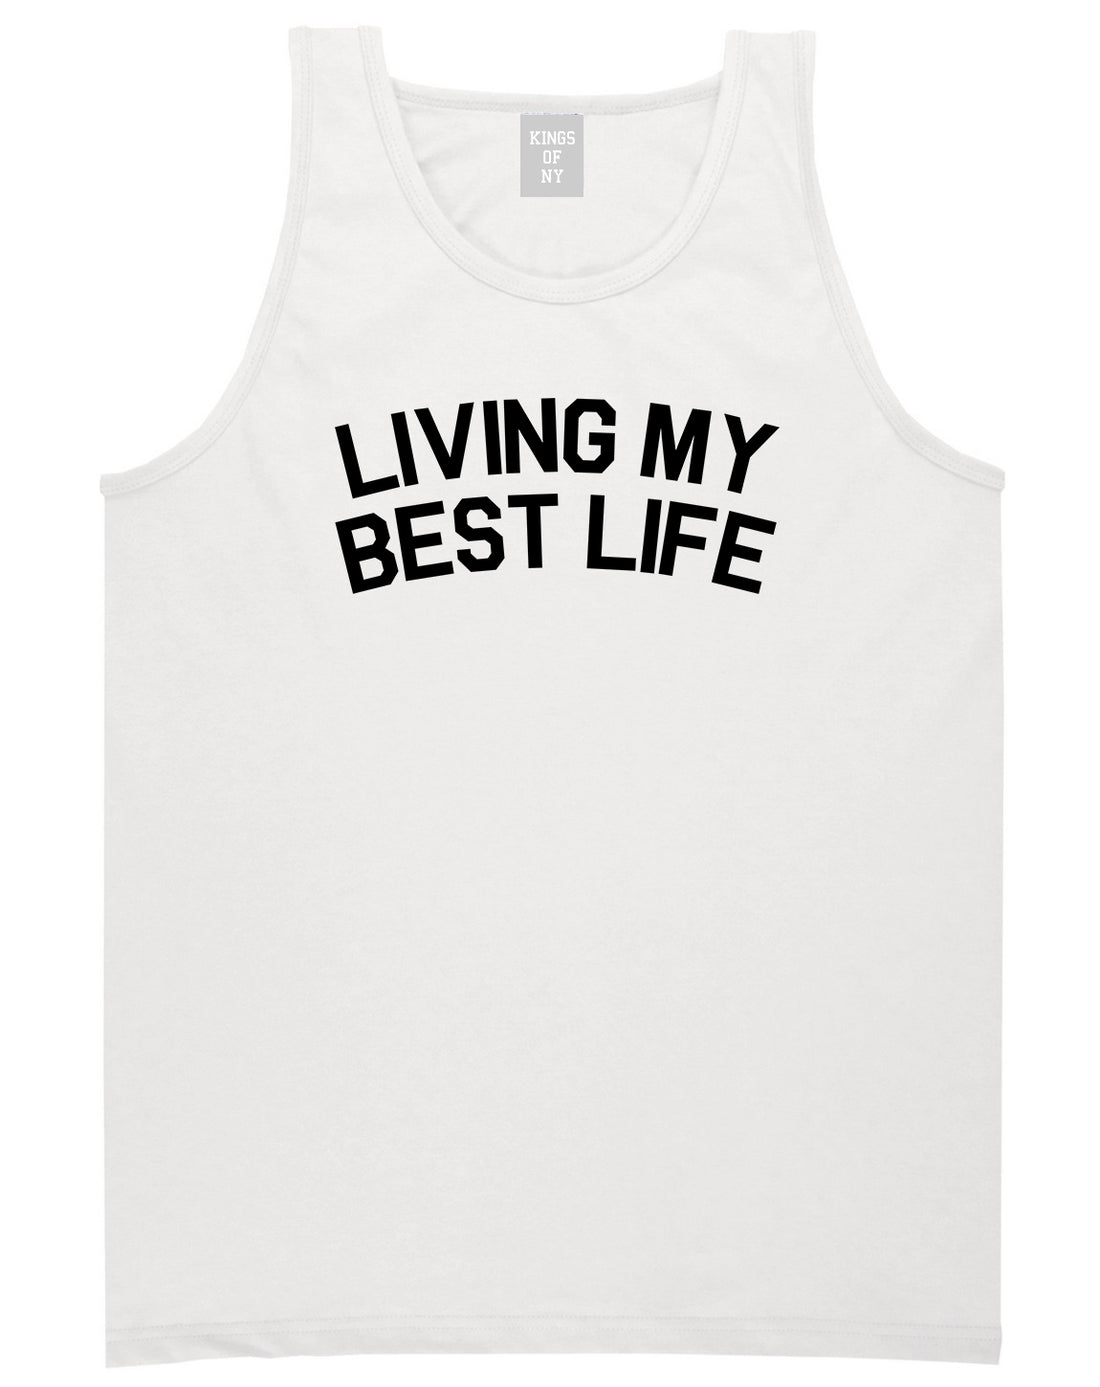 Living My Best Life Mens Tank Top Shirt White by Kings Of NY